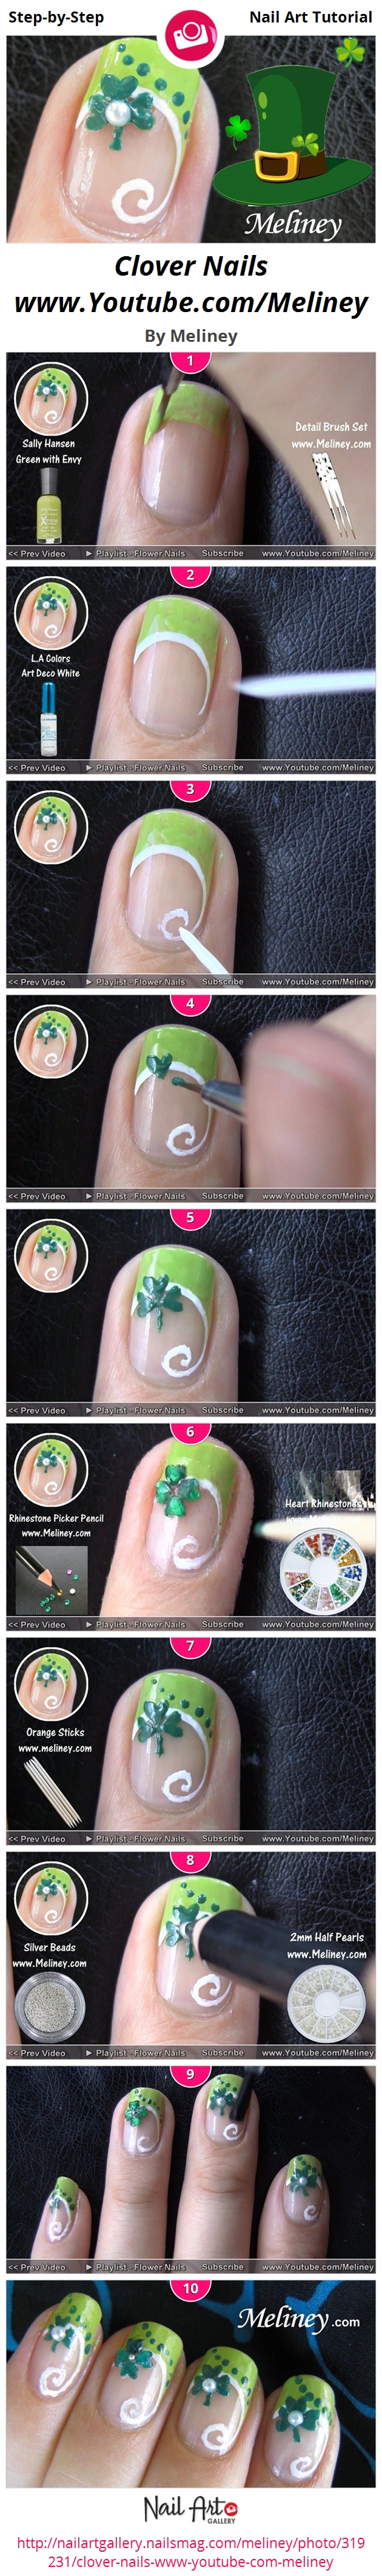 Clover Nails www.Youtube.com/Meliney - Nail Art Gallery